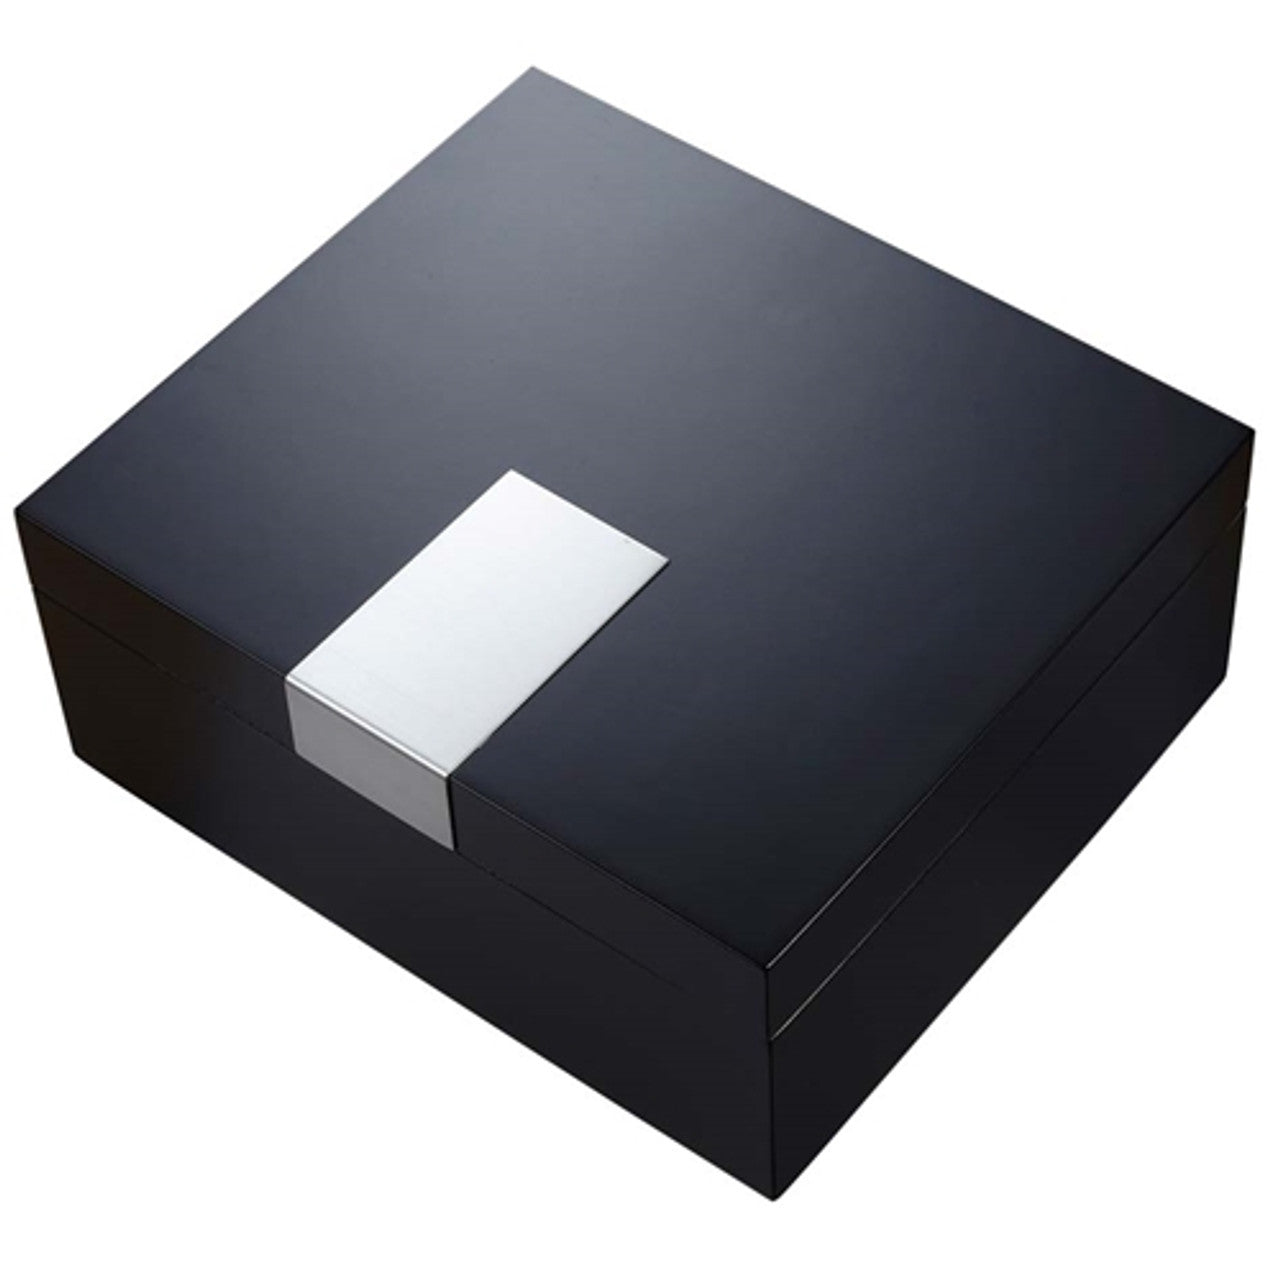 MARCUS BLACK MATTE CIGAR HUMIDOR - HOLDS 50 CIGARS Personalize engraving